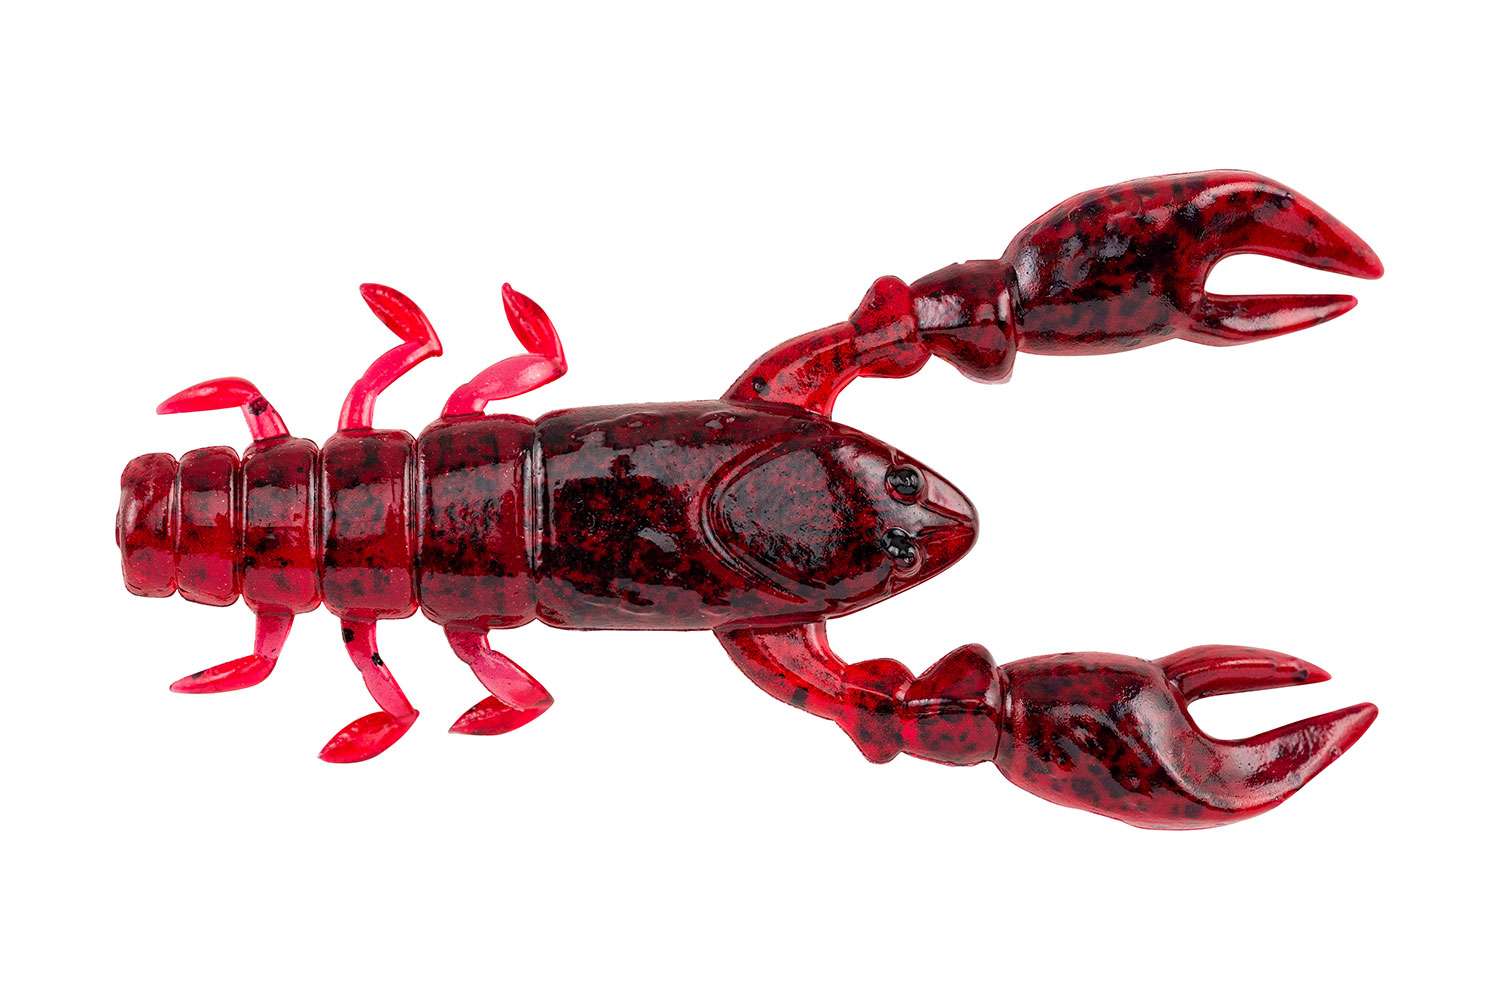   <b>Berkley PowerBait Jordan Lee The Champ Craw </b>
<BR>This bait was designed by two-time Bassmaster Classic winner, Jordan Lee. The Champ Craw features a lifelike profile with large claws that float for a lifelike action, and the new HD Tru Color technology mimics real bait.</p>
<p><b>MSRP: $5.99-$6.99</b></p>
